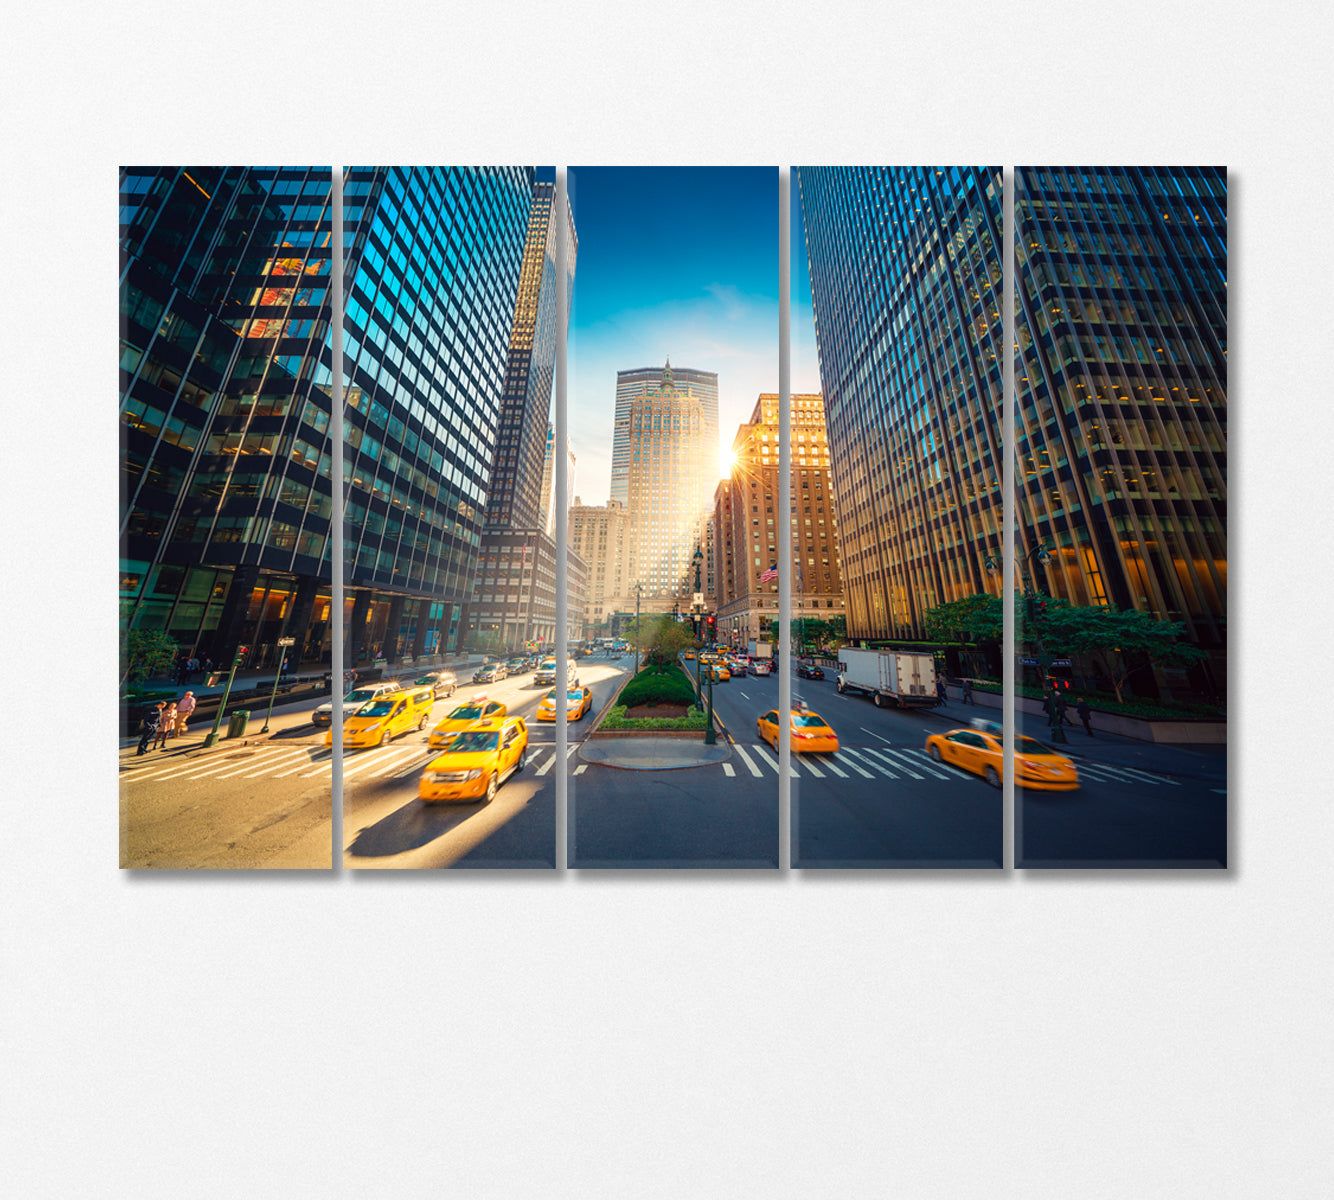 New York Skyscrapers and the Famous Yellow Taxi Cars Canvas Print-Canvas Print-CetArt-5 Panels-36x24 inches-CetArt